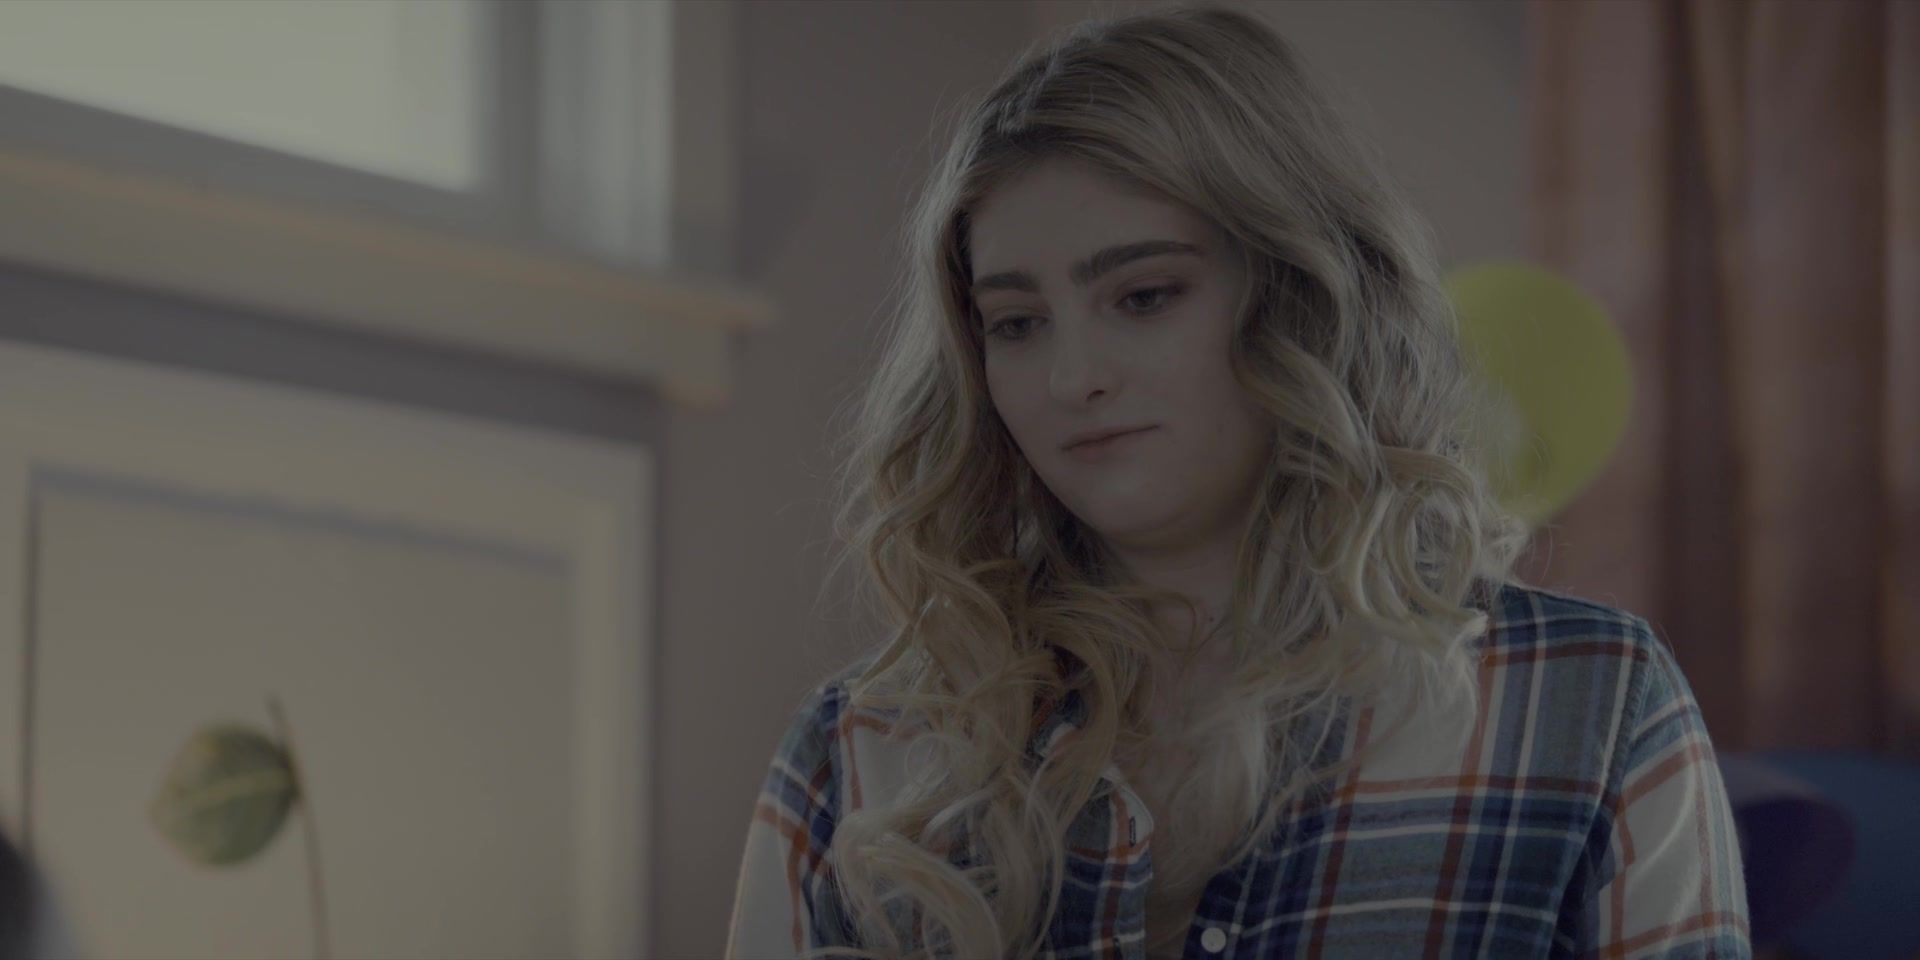 Young Nude Willow Shields, Sarah Wright - Spinning Out s01e09-10 (2020) Top